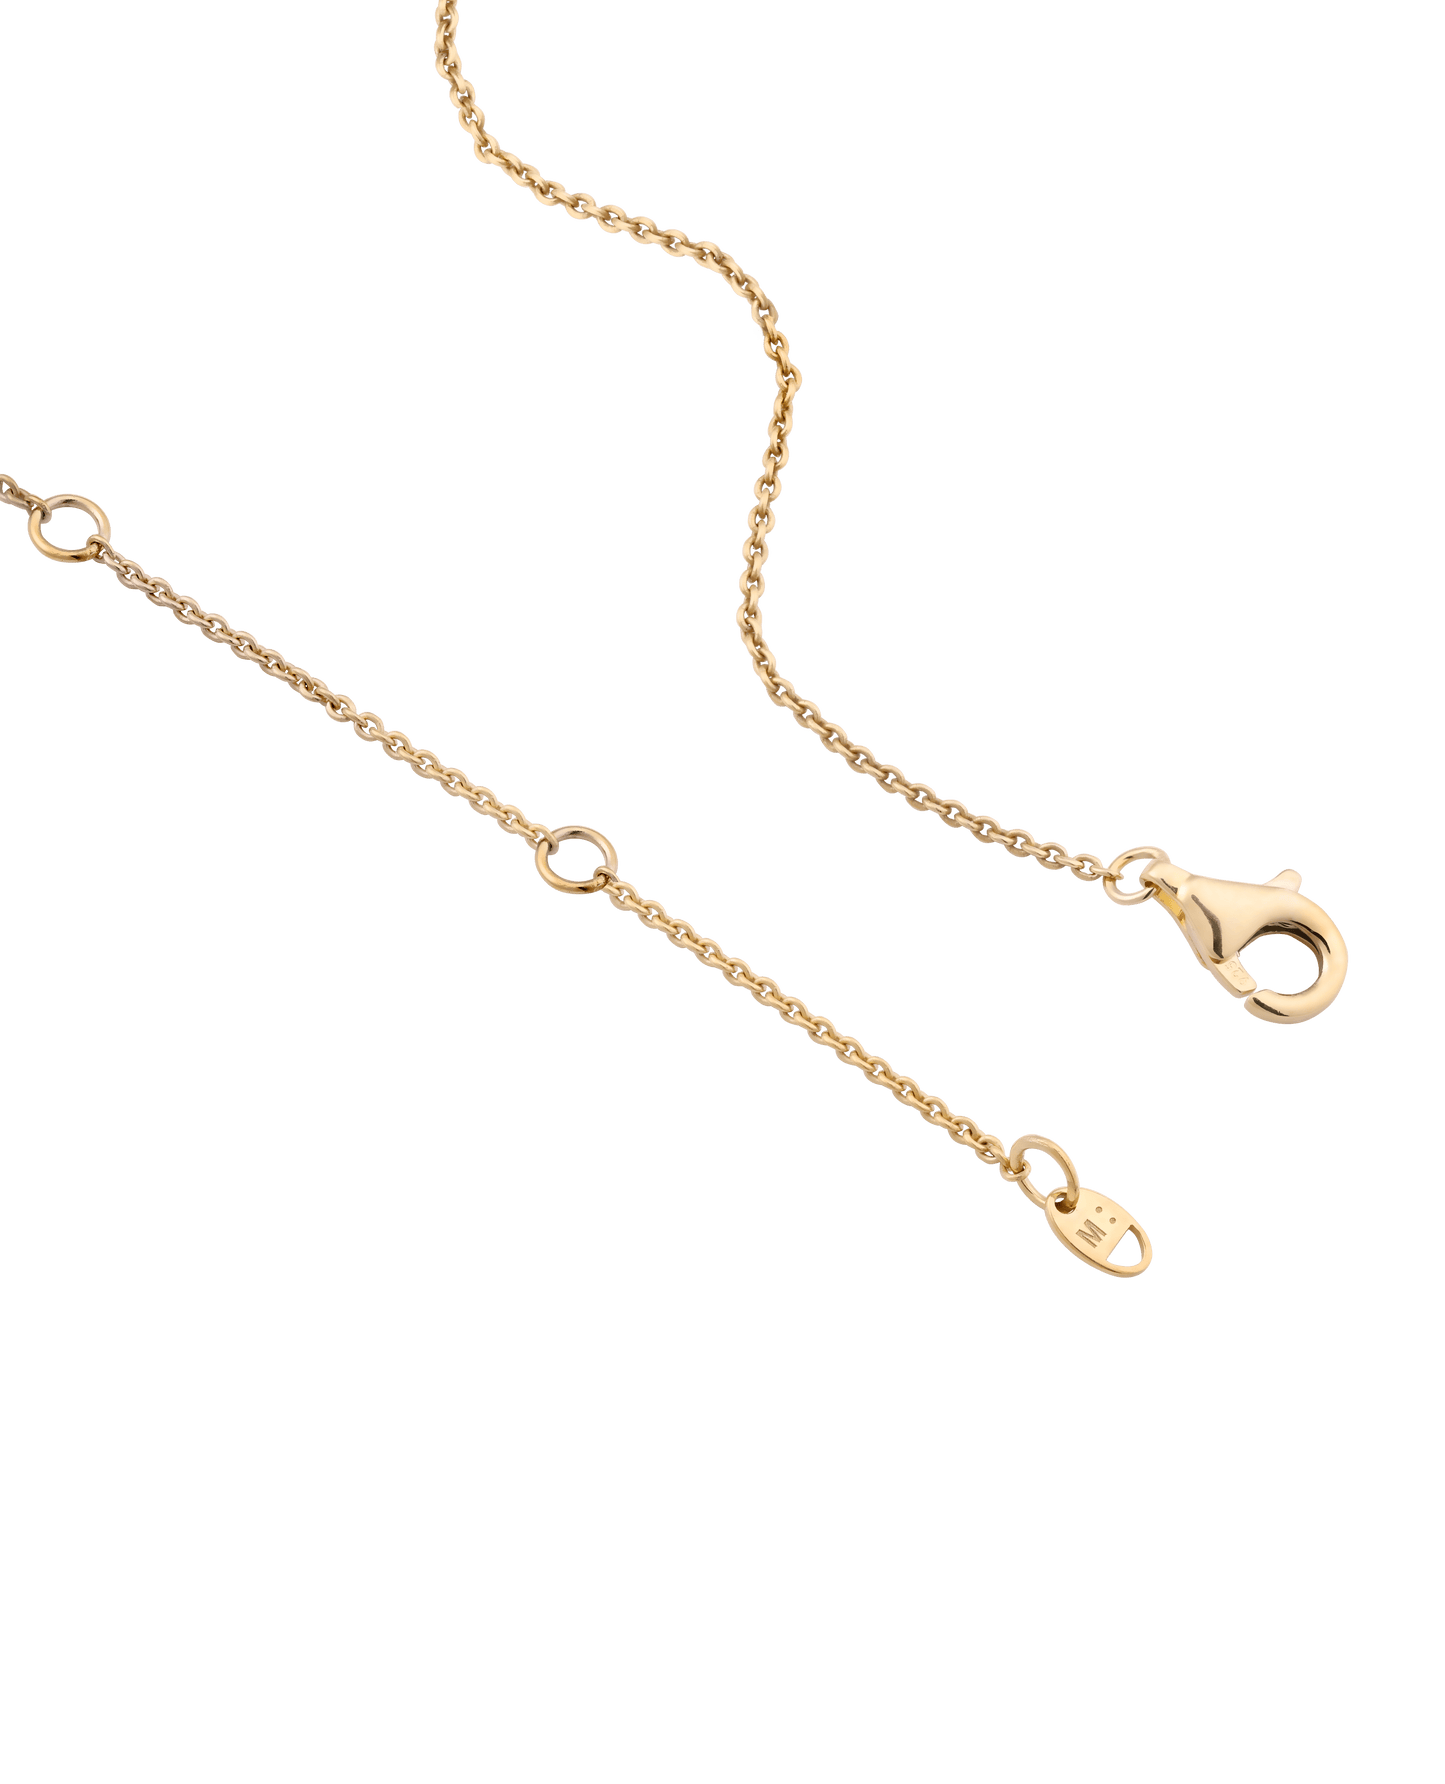 Hedra Necklace - 14K Yellow Gold Necklaces magal-dev 